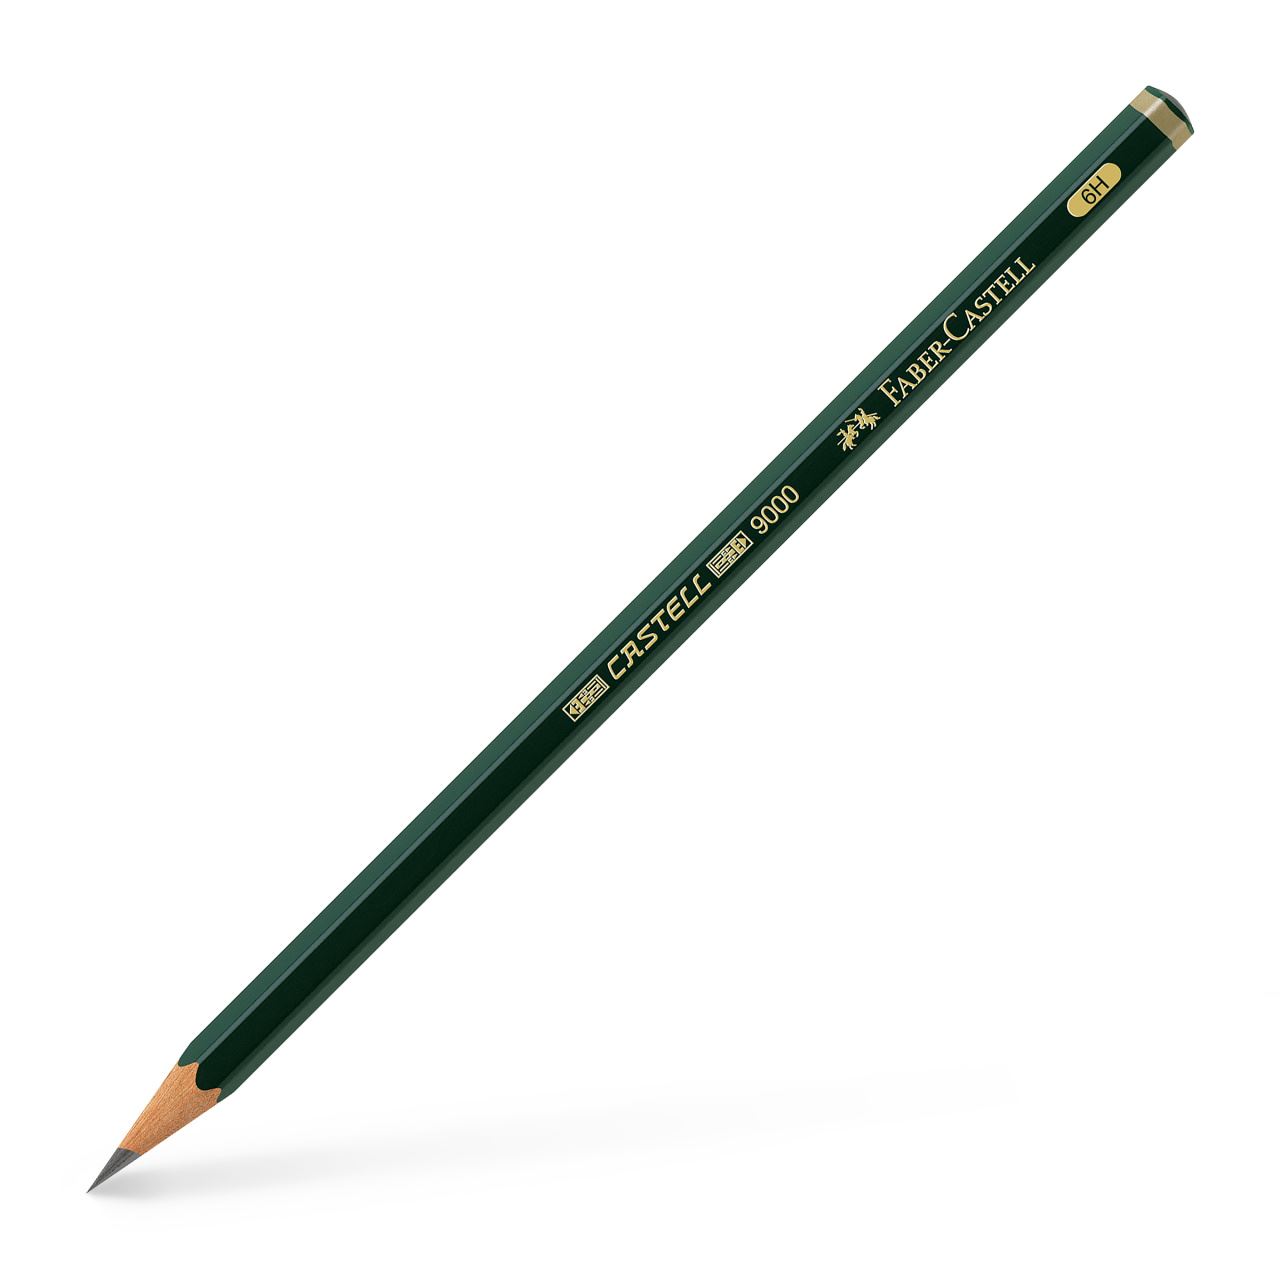 Faber-Castell - Crayon graphite Castell 9000 6H